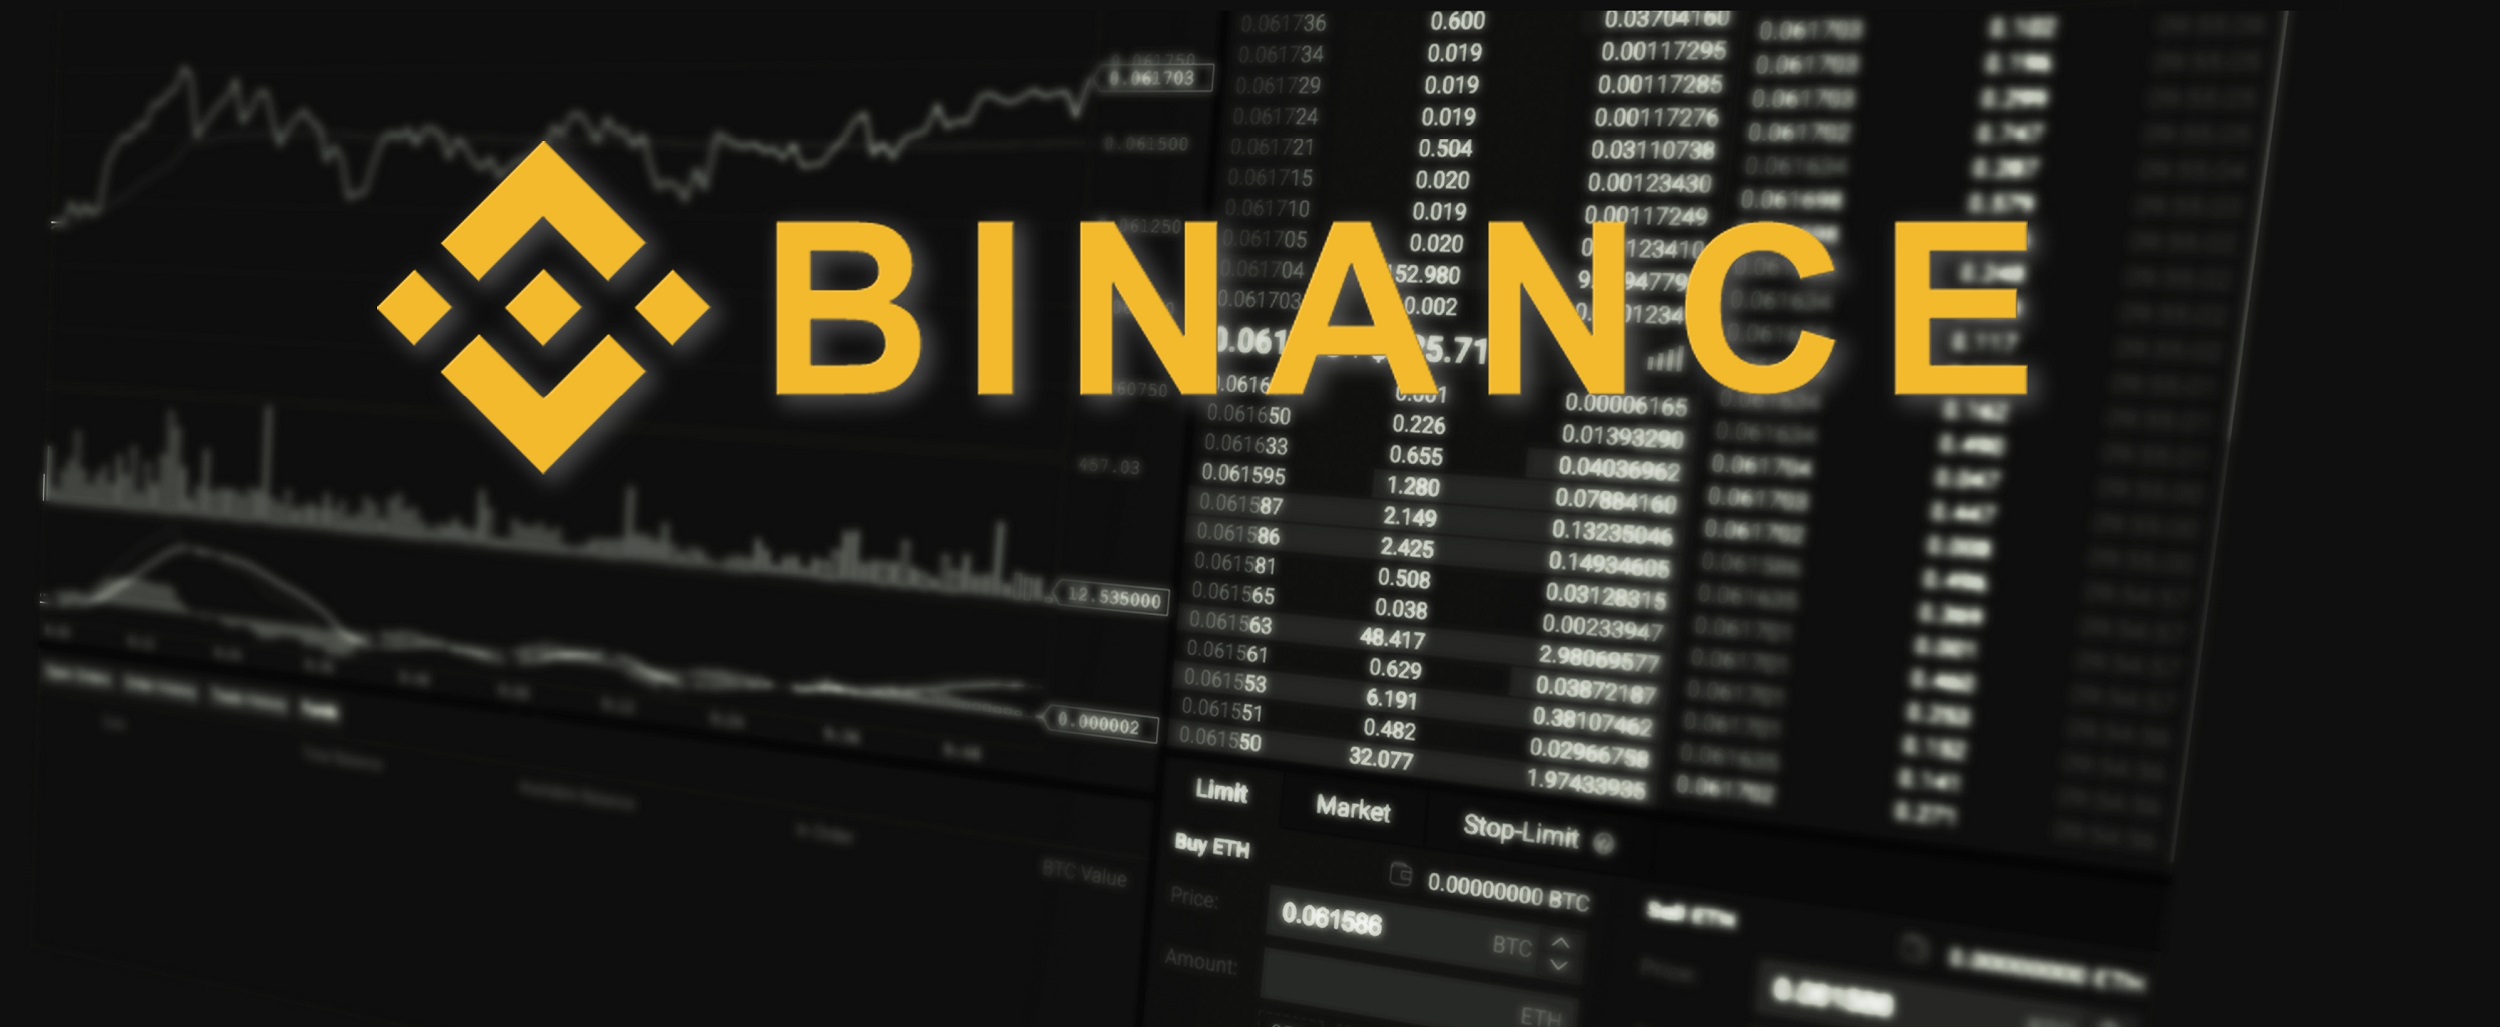 Binance Coin Price Dips as Investors Question the Current Business Model